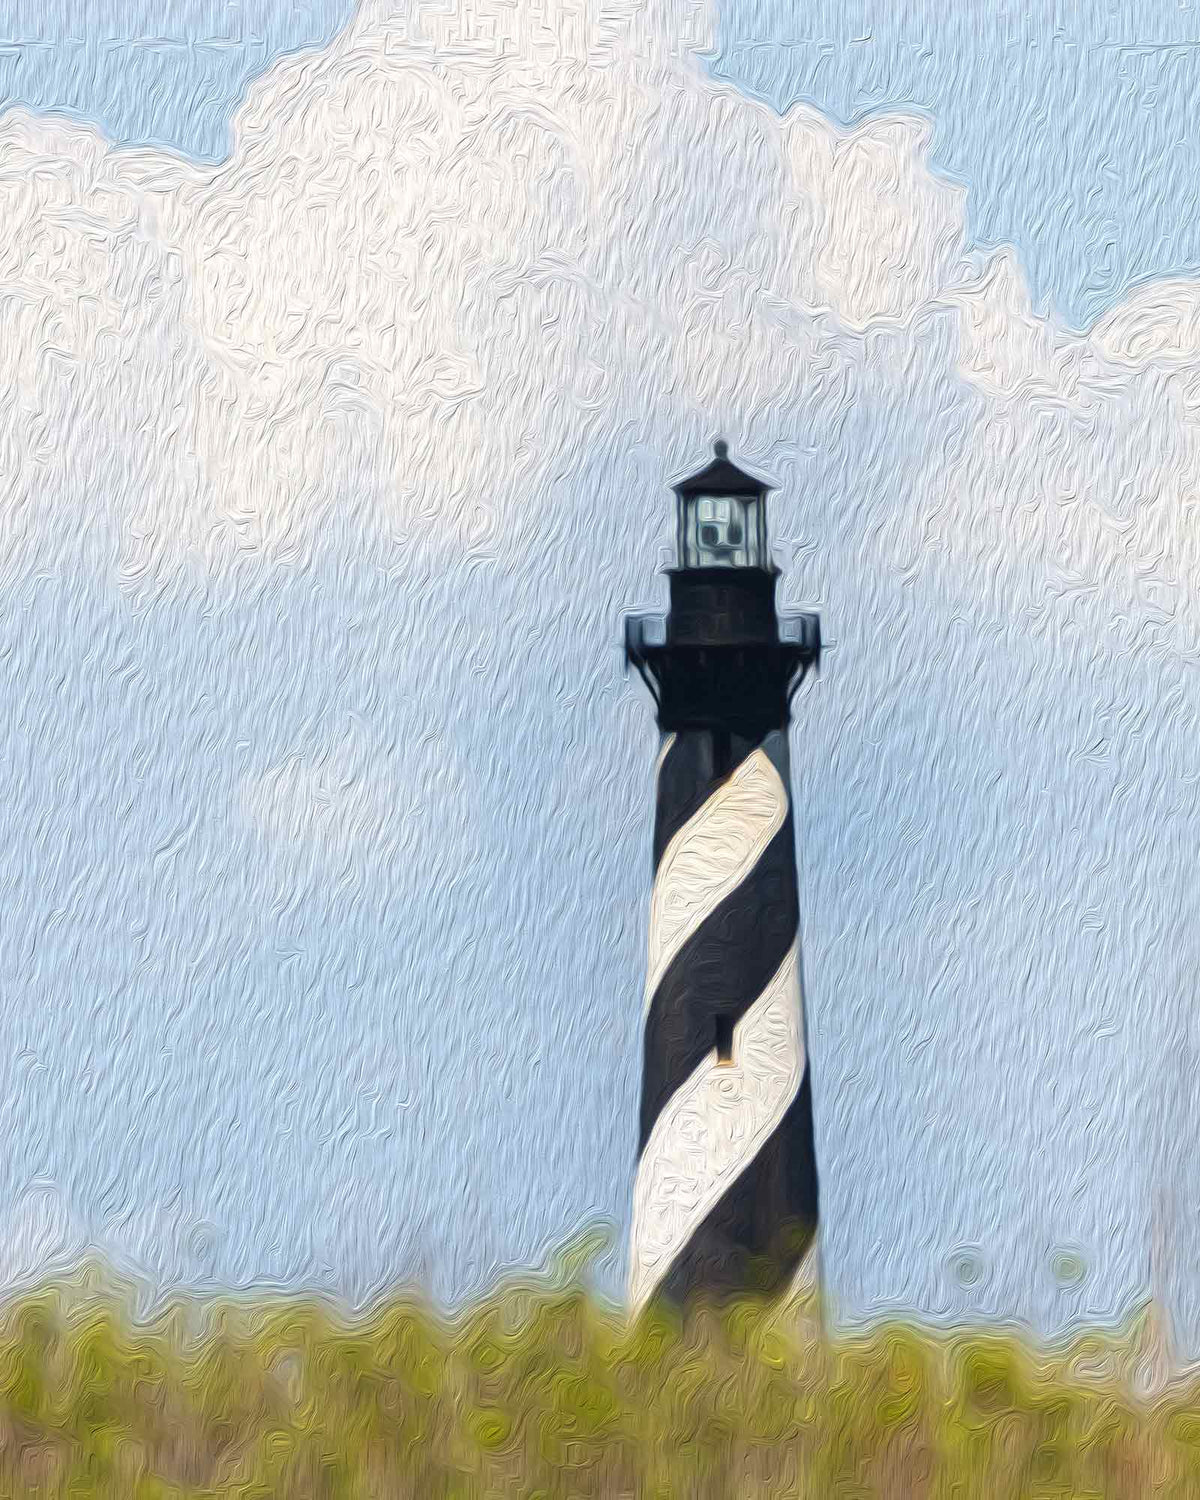 Cape Hatteras Lighthouse (Outer Banks)